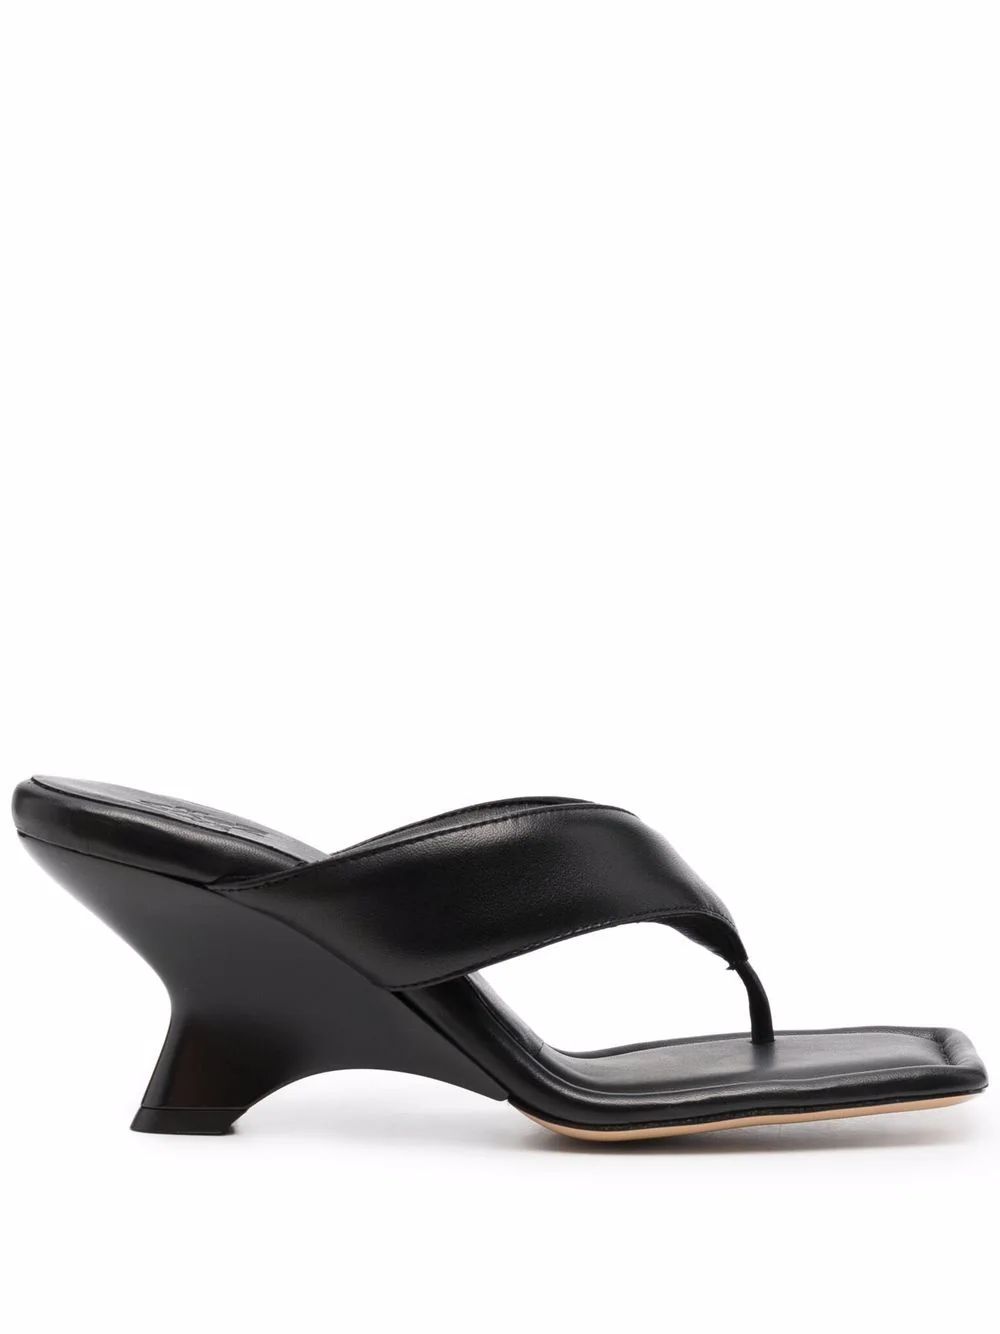 padded leather heeled sandals | Farfetch Global